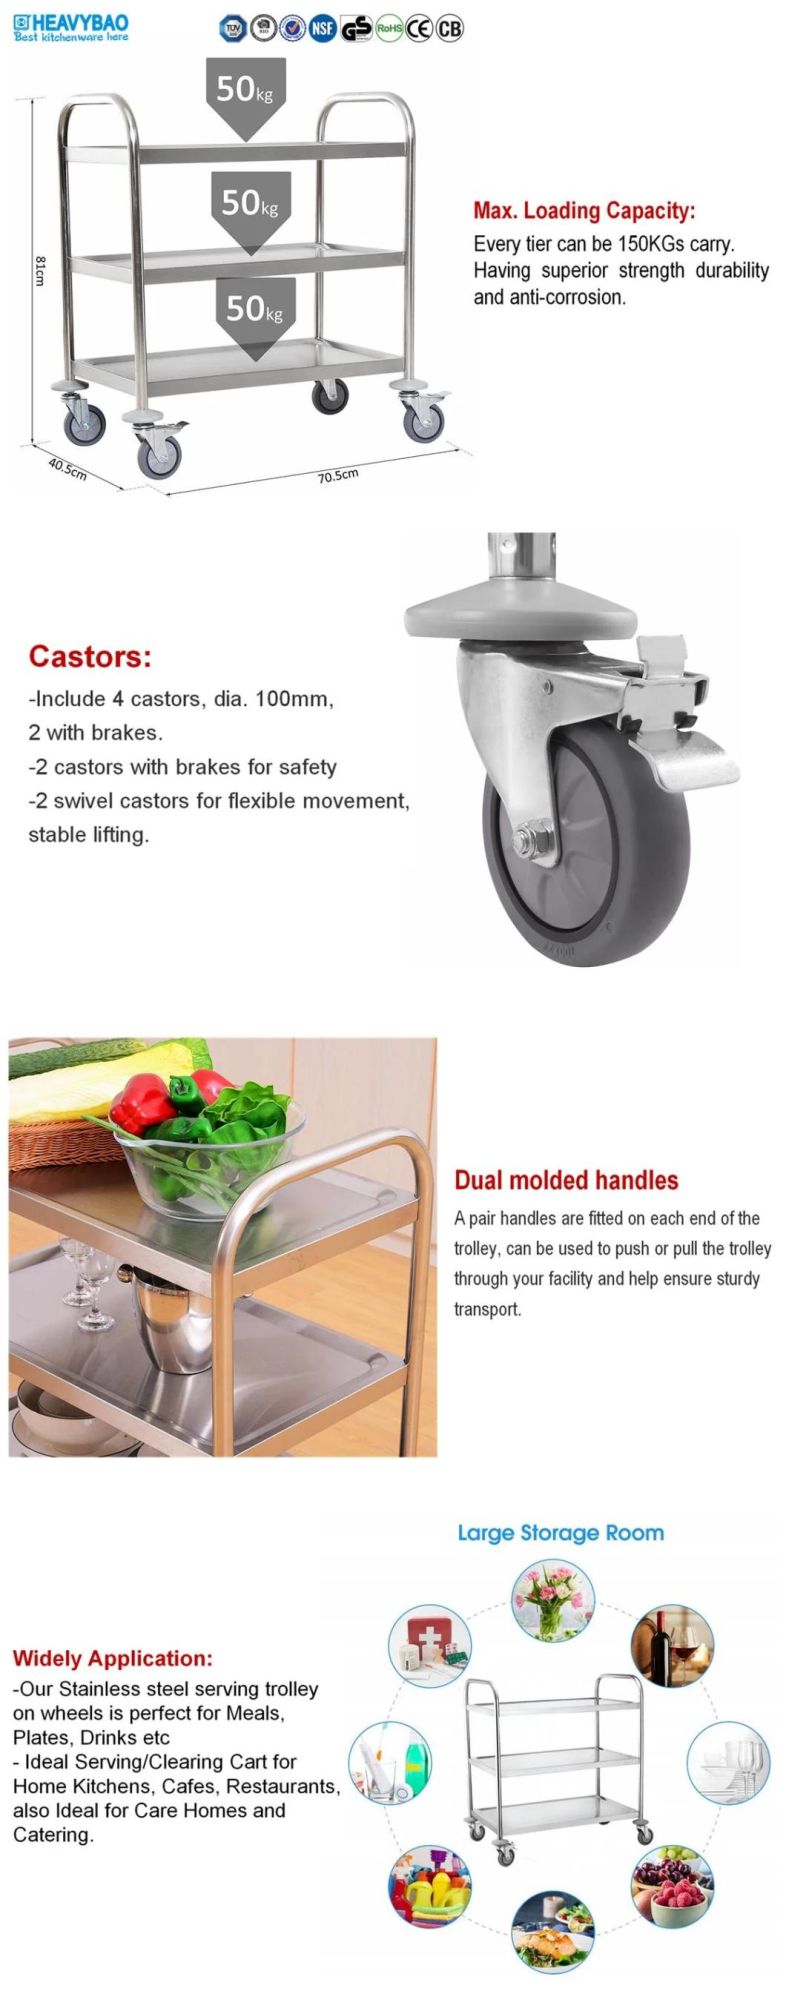 Heavybao Hotel Stainless Steel 2-Tier Round Tube Serving Trolley Cart